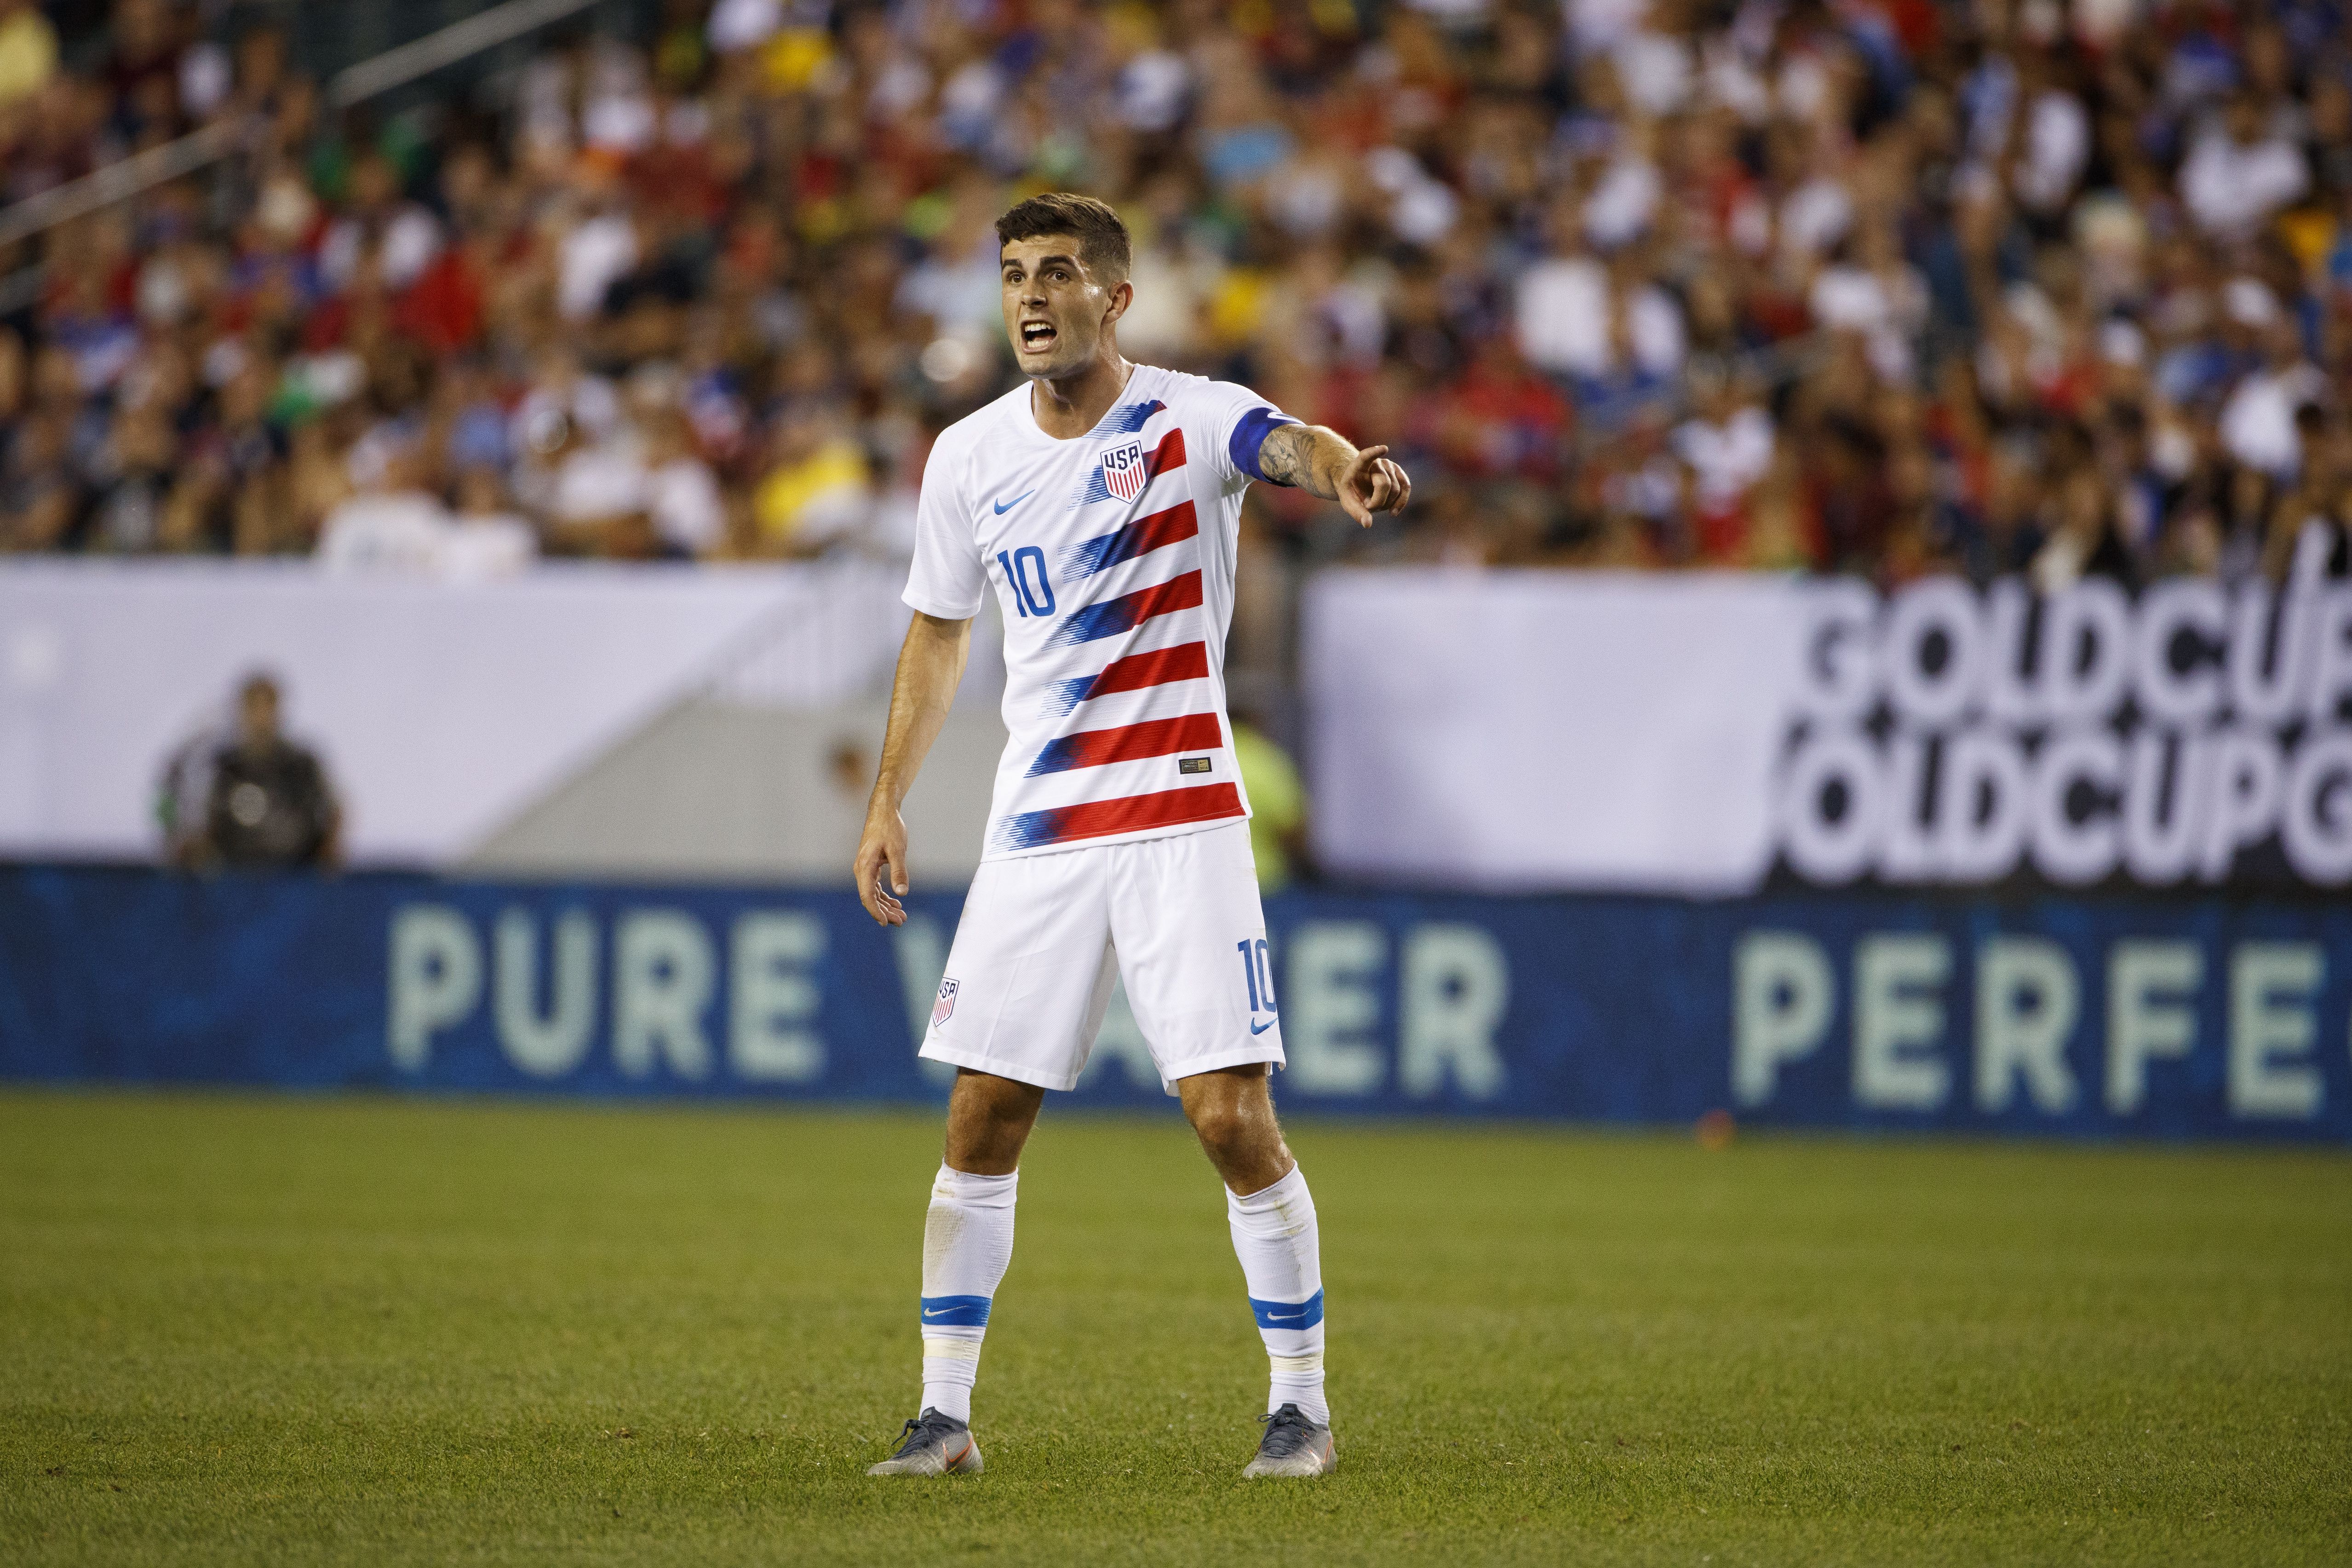 Dominerende trug Fra How to watch Kawasaki vs. Chelsea, USMNT star Christian Pulisic's potential  debut for Blues | Live stream, date, time, USA TV, channel - nj.com